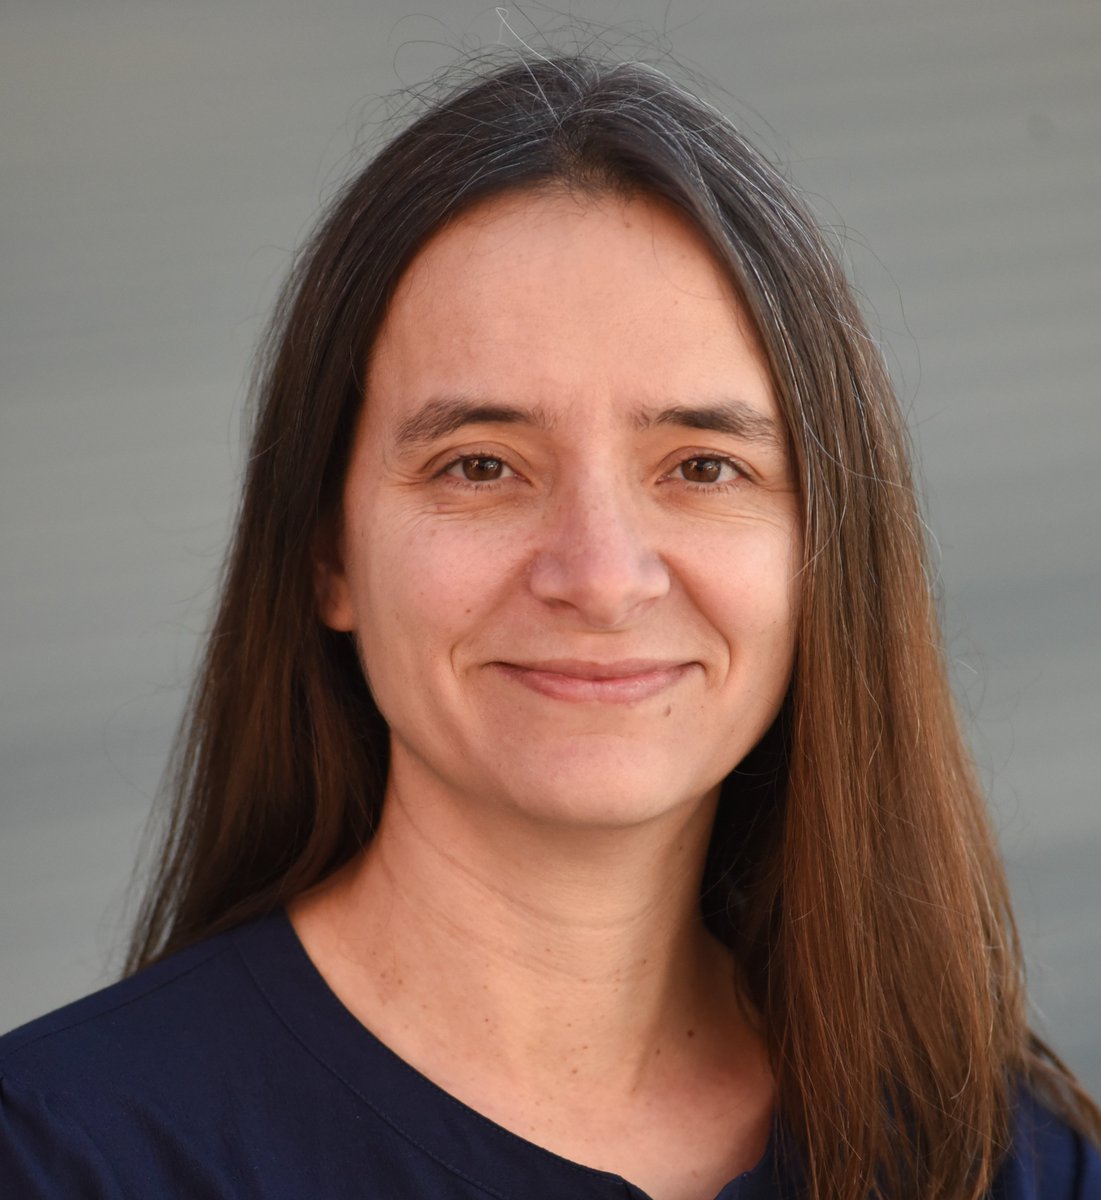 Congratulations to our HDA Women's Excellence in Research Award winner for 2024 – Dr Dorothea Dumuid, Senior Research Fellow @ARENA_UniSA @UniversitySA Dot will receive $1,000 and will present her research work at an upcoming HDA event 👉 health.adelaide.edu.au/healthy-develo…